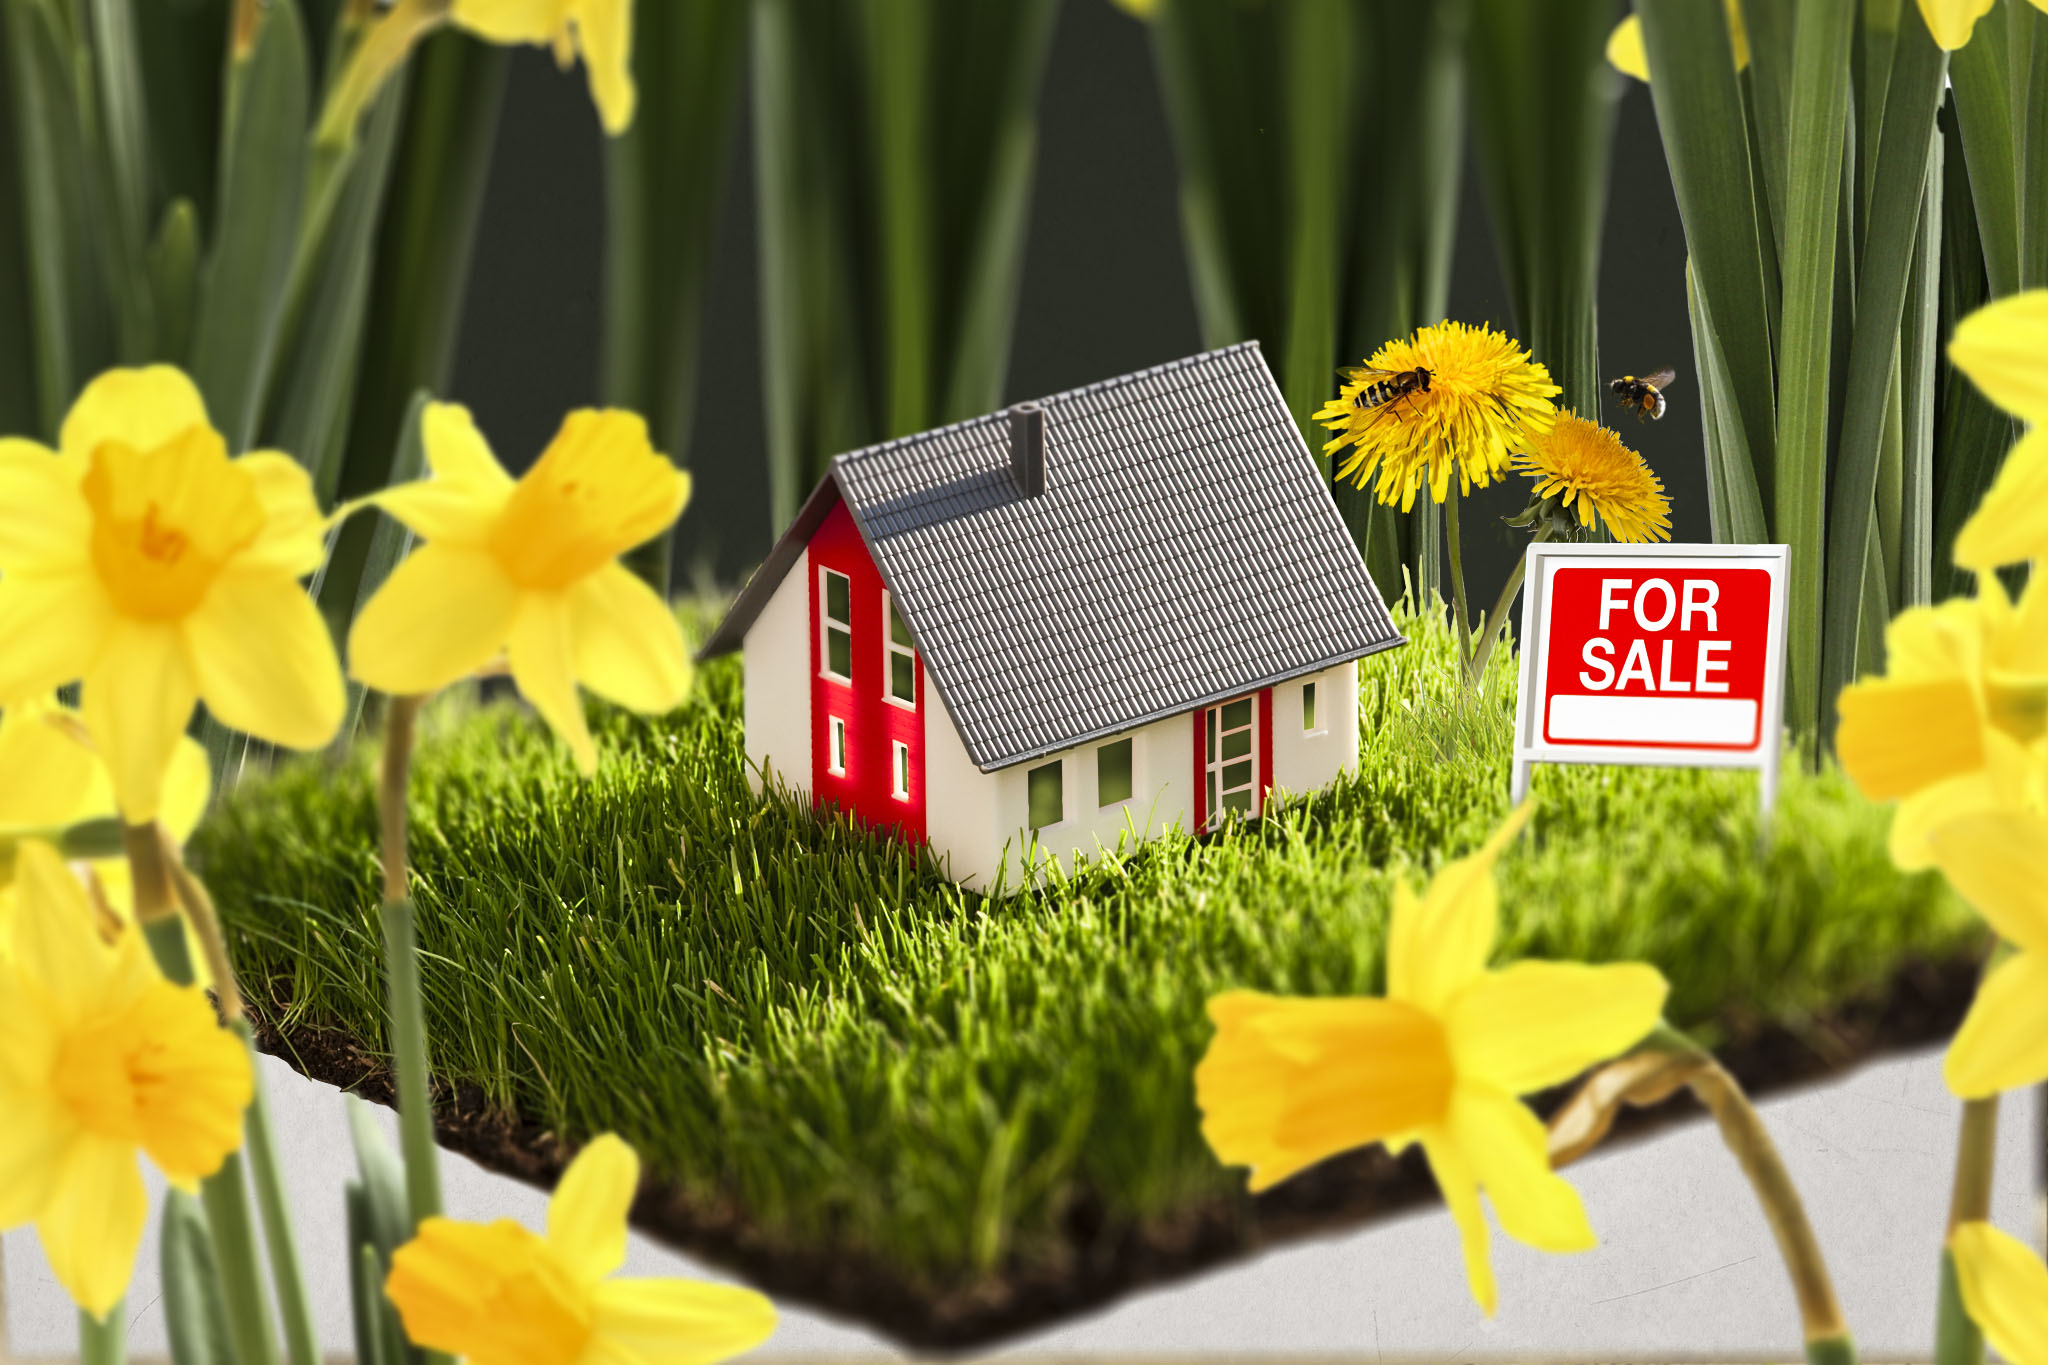 Will Ontario’s spring real estate market be hot or cold? Here are signs to watch for